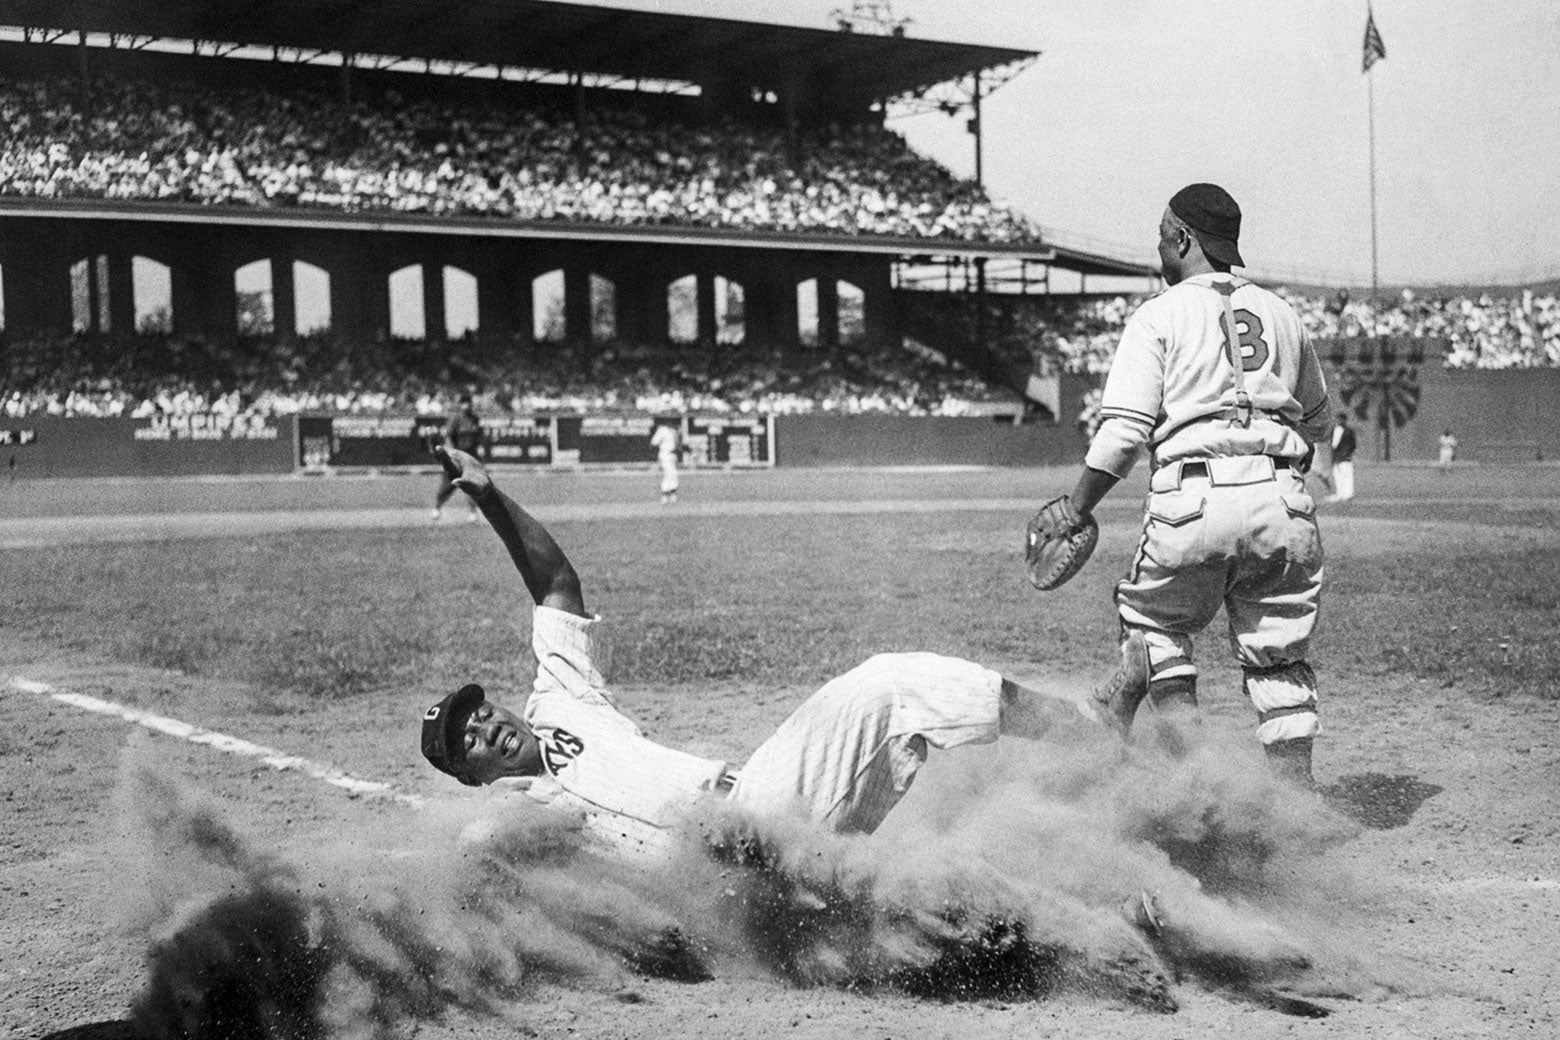 Josh Gibson slides into home, kicking up a cloud of dust at home plate, wincing